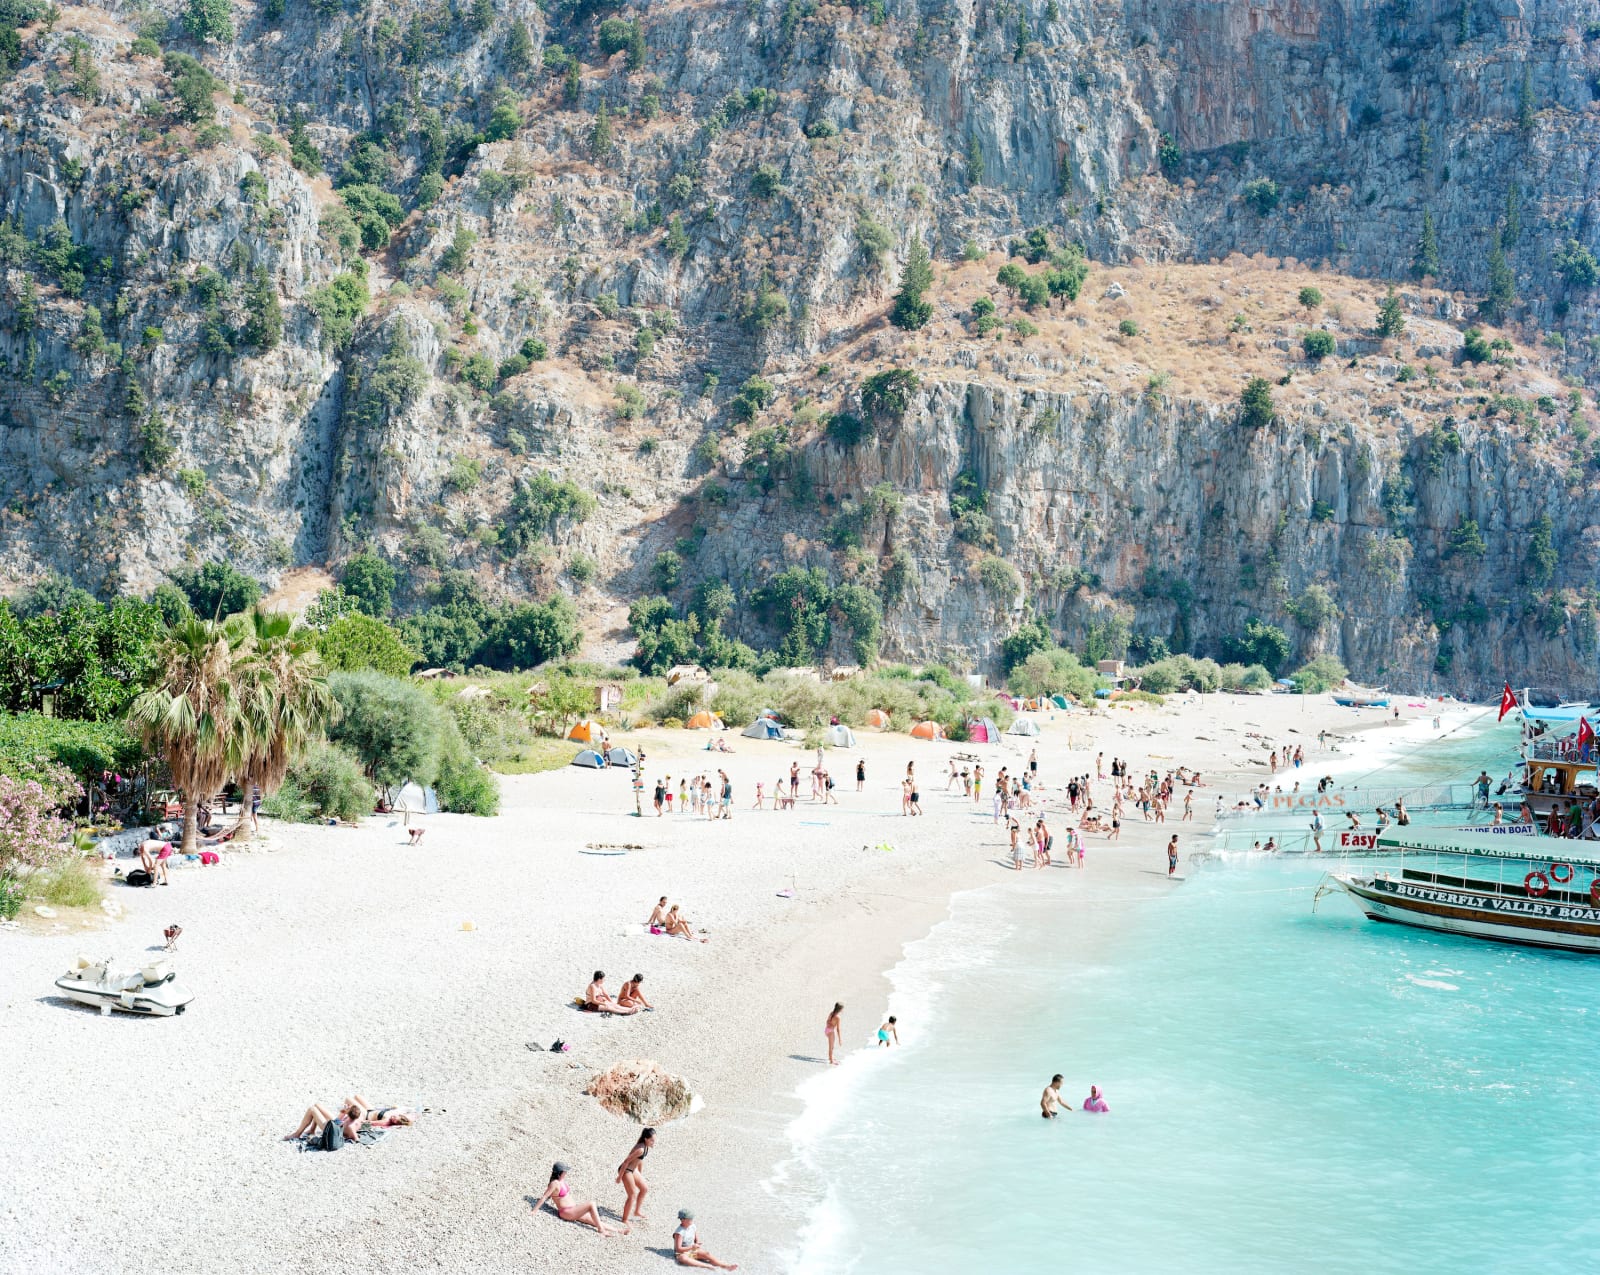 Beachgoers relaxing by the ocean with cliffs in background in Butterfly Valley, Turkey, by Massimo Vitali